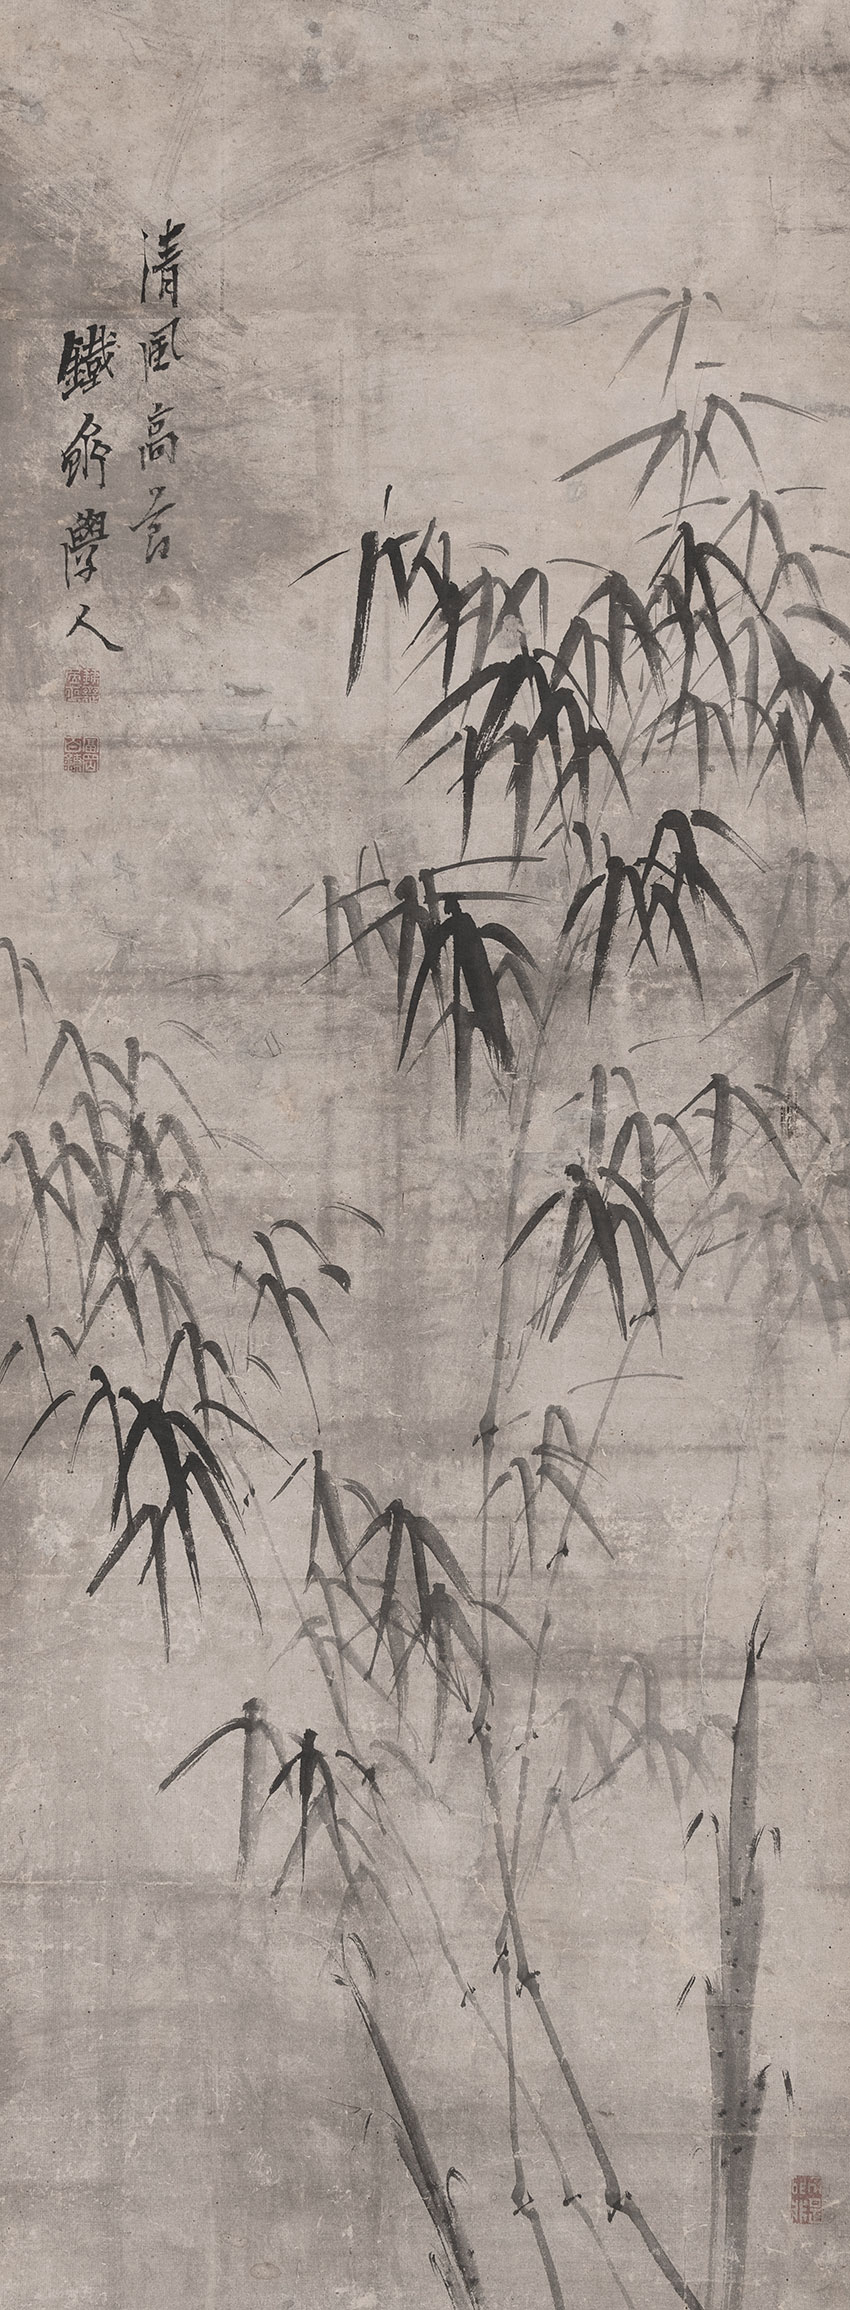 Tomioka Tessai. Kyotoall over Japan 1837-1924. Some stalks of bamboo grass. Painting in ink on paper, 131,5 x 49,7 cm_RET